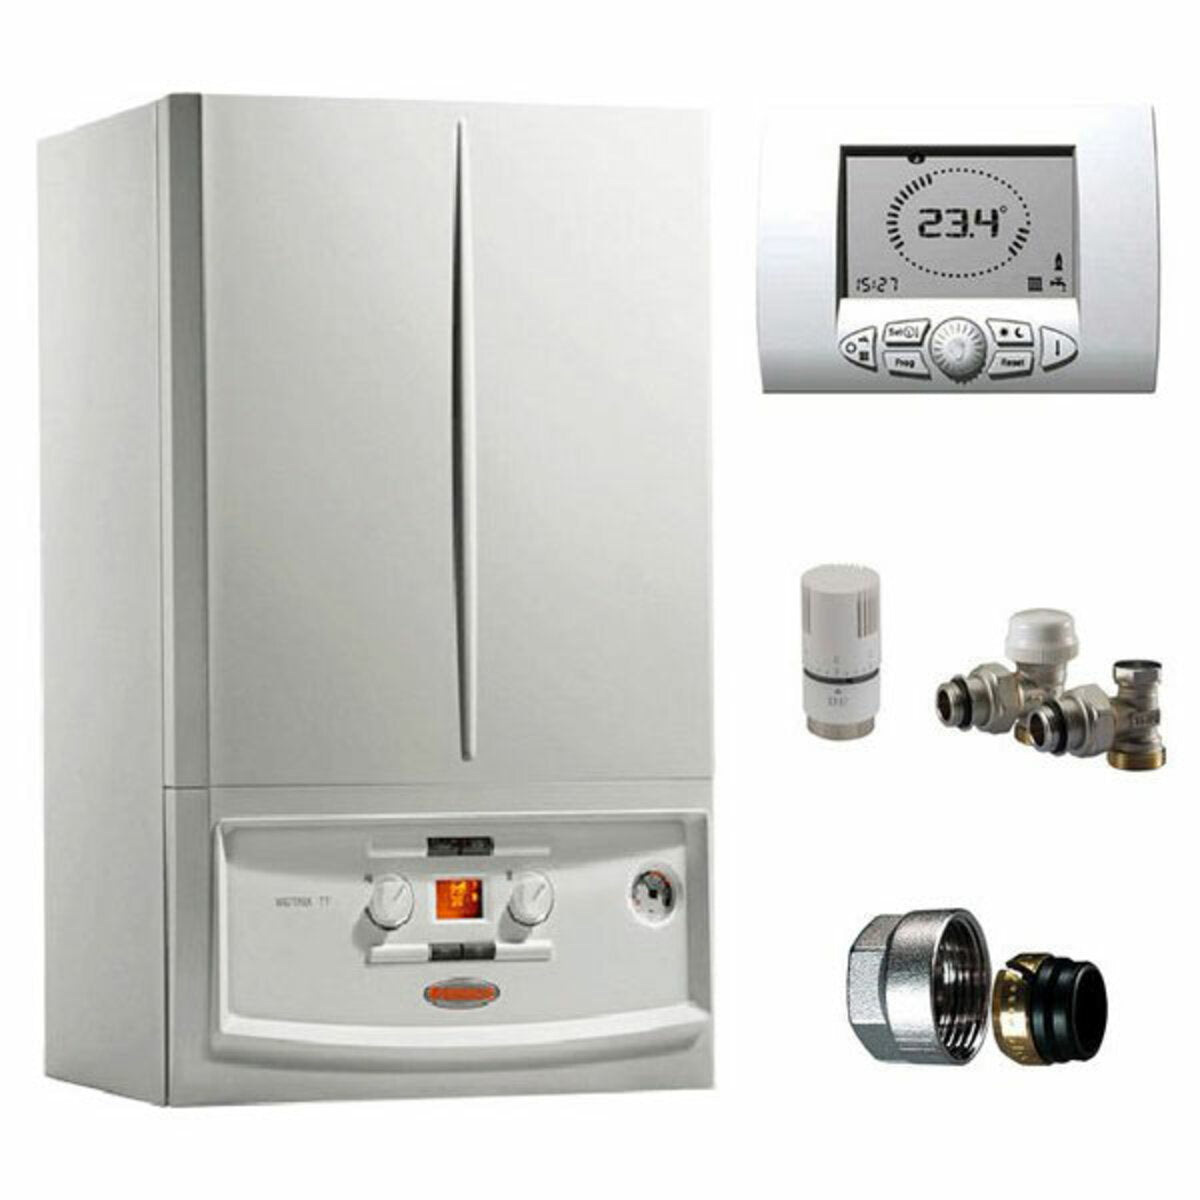 Condensing boiler Immergas victrix 24 tt erp sealed chamber 21 kW methane and lpg